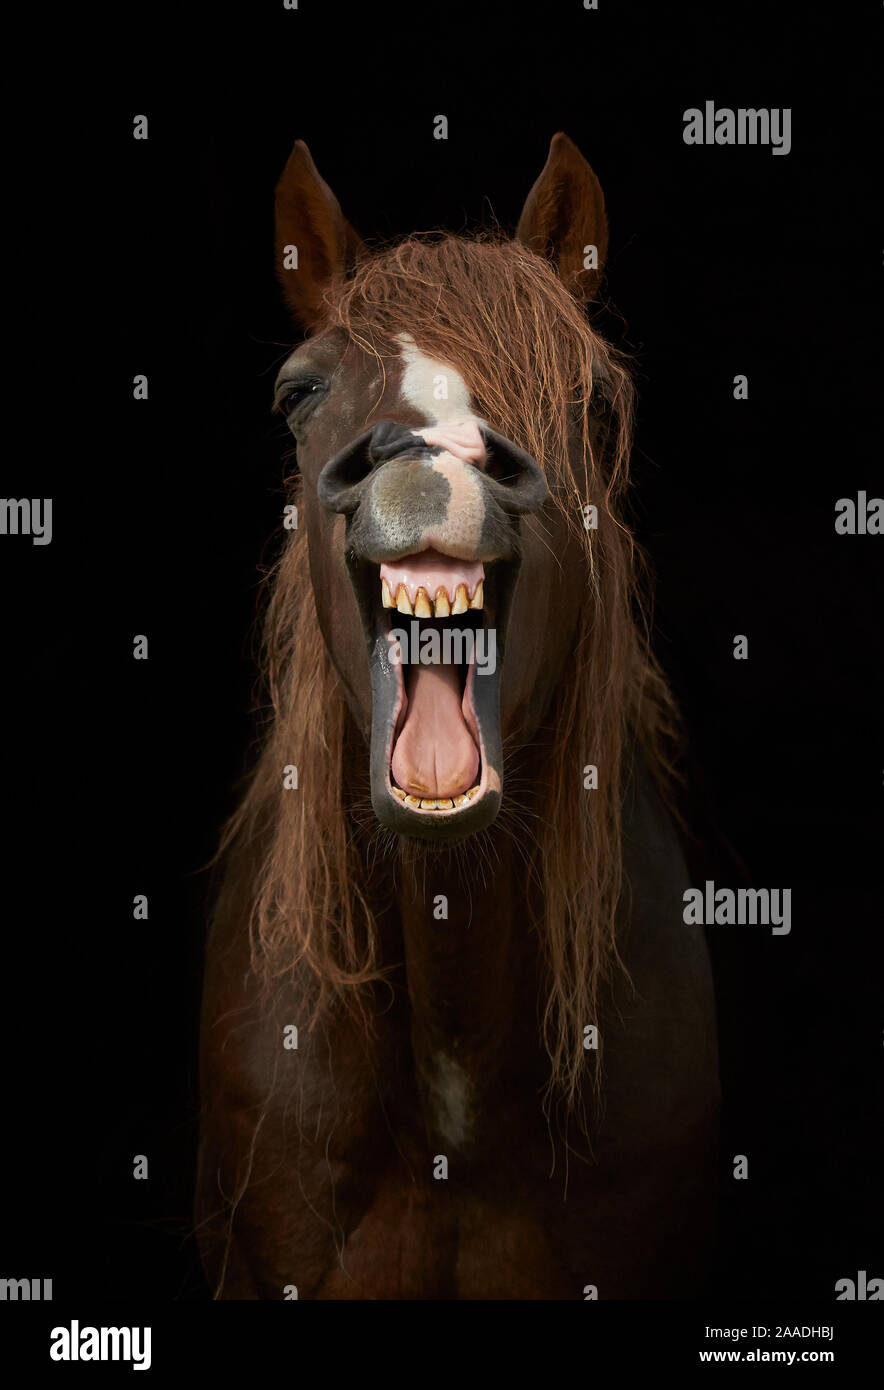 Morgan horse with mouth open, yawning against black background. Stock Photo